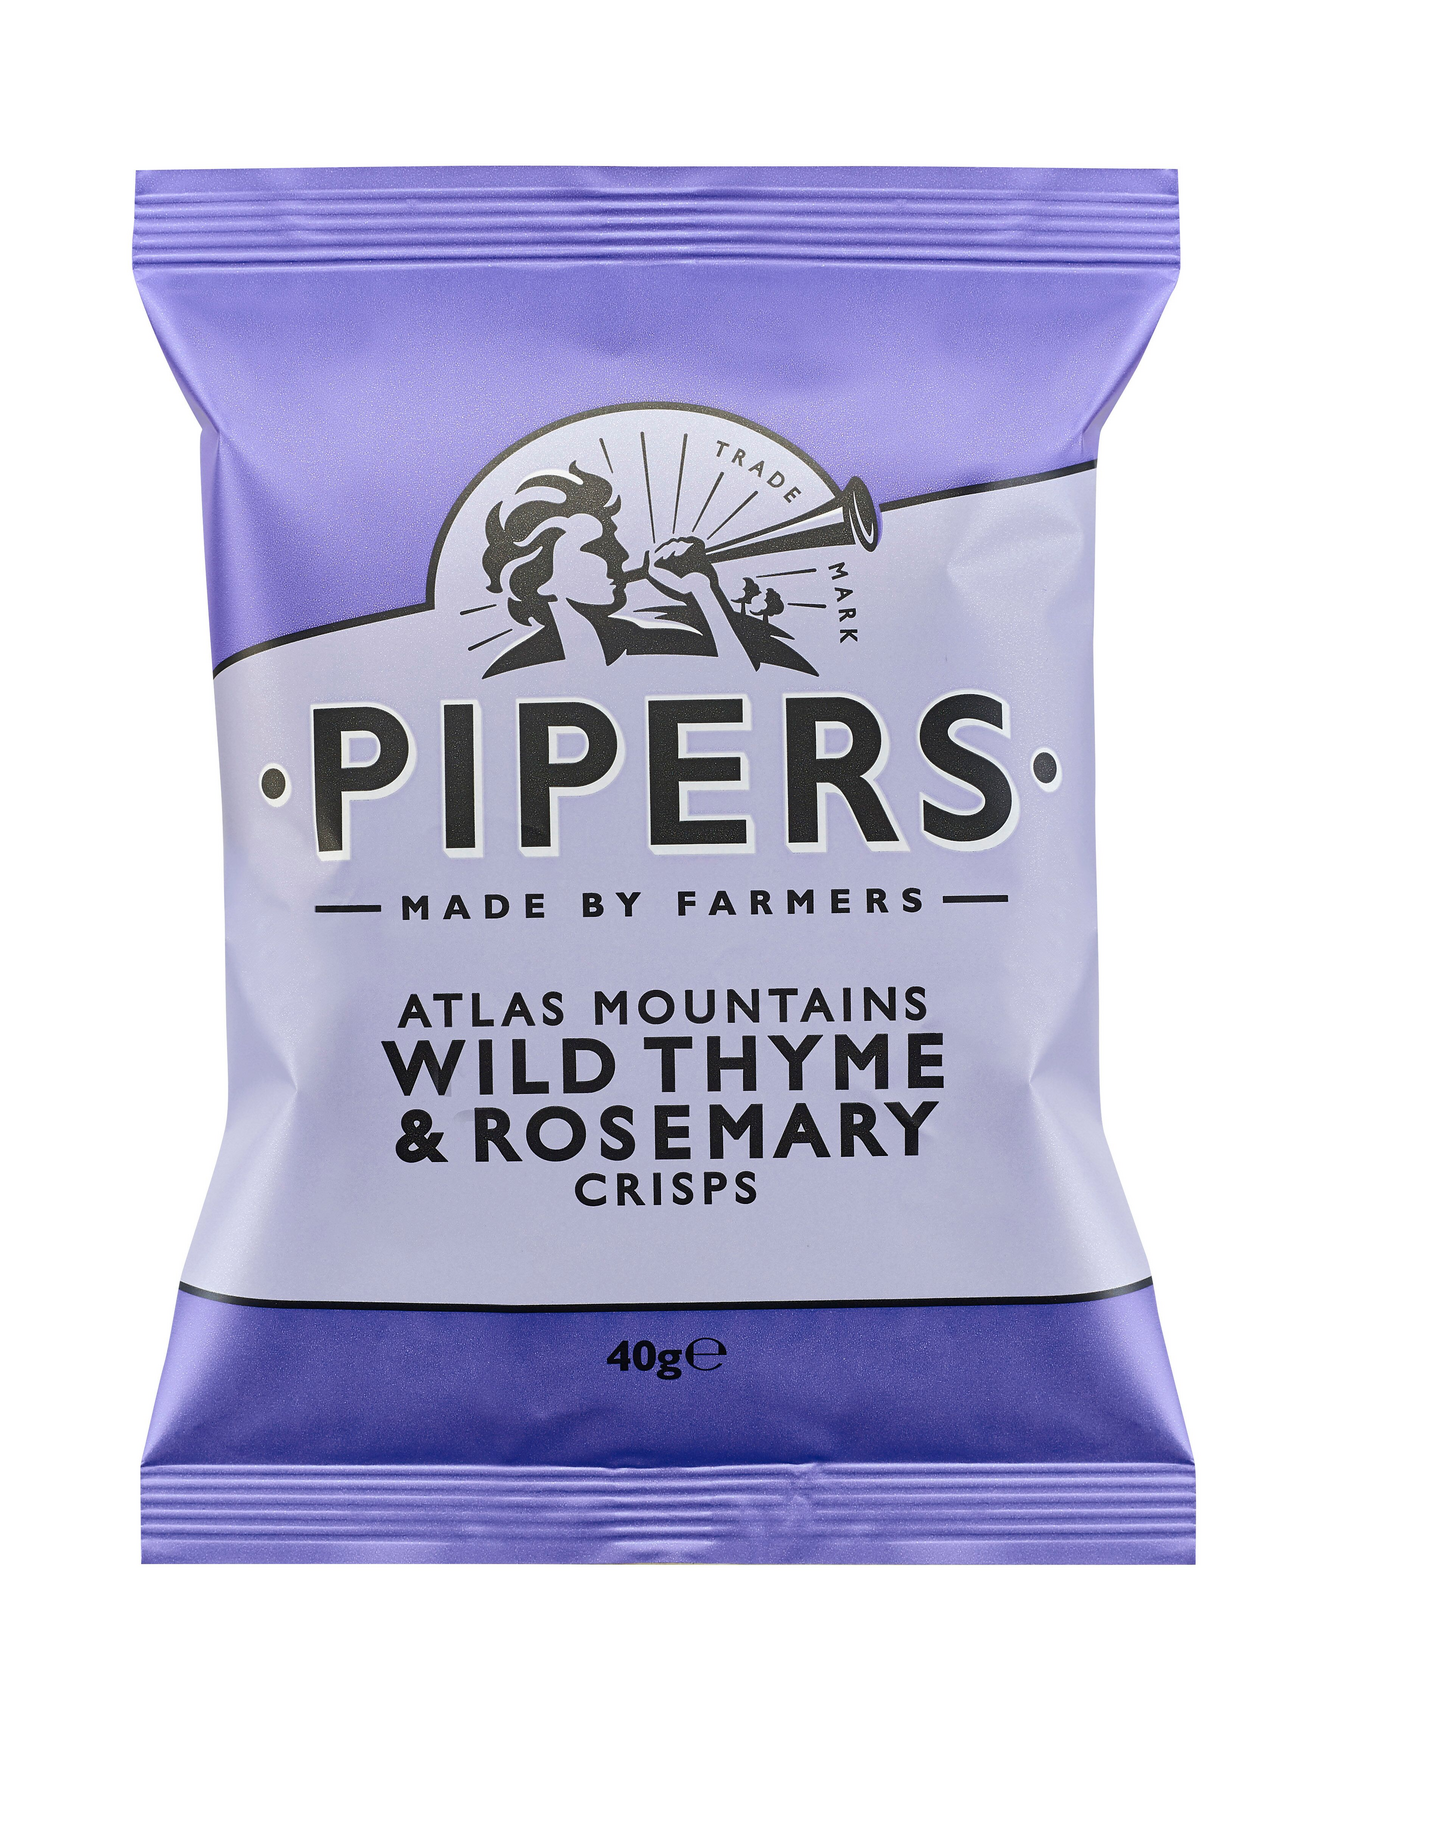 Pipers Crisp Atlas Mountains Wild Thyme & Rosemary 40 g